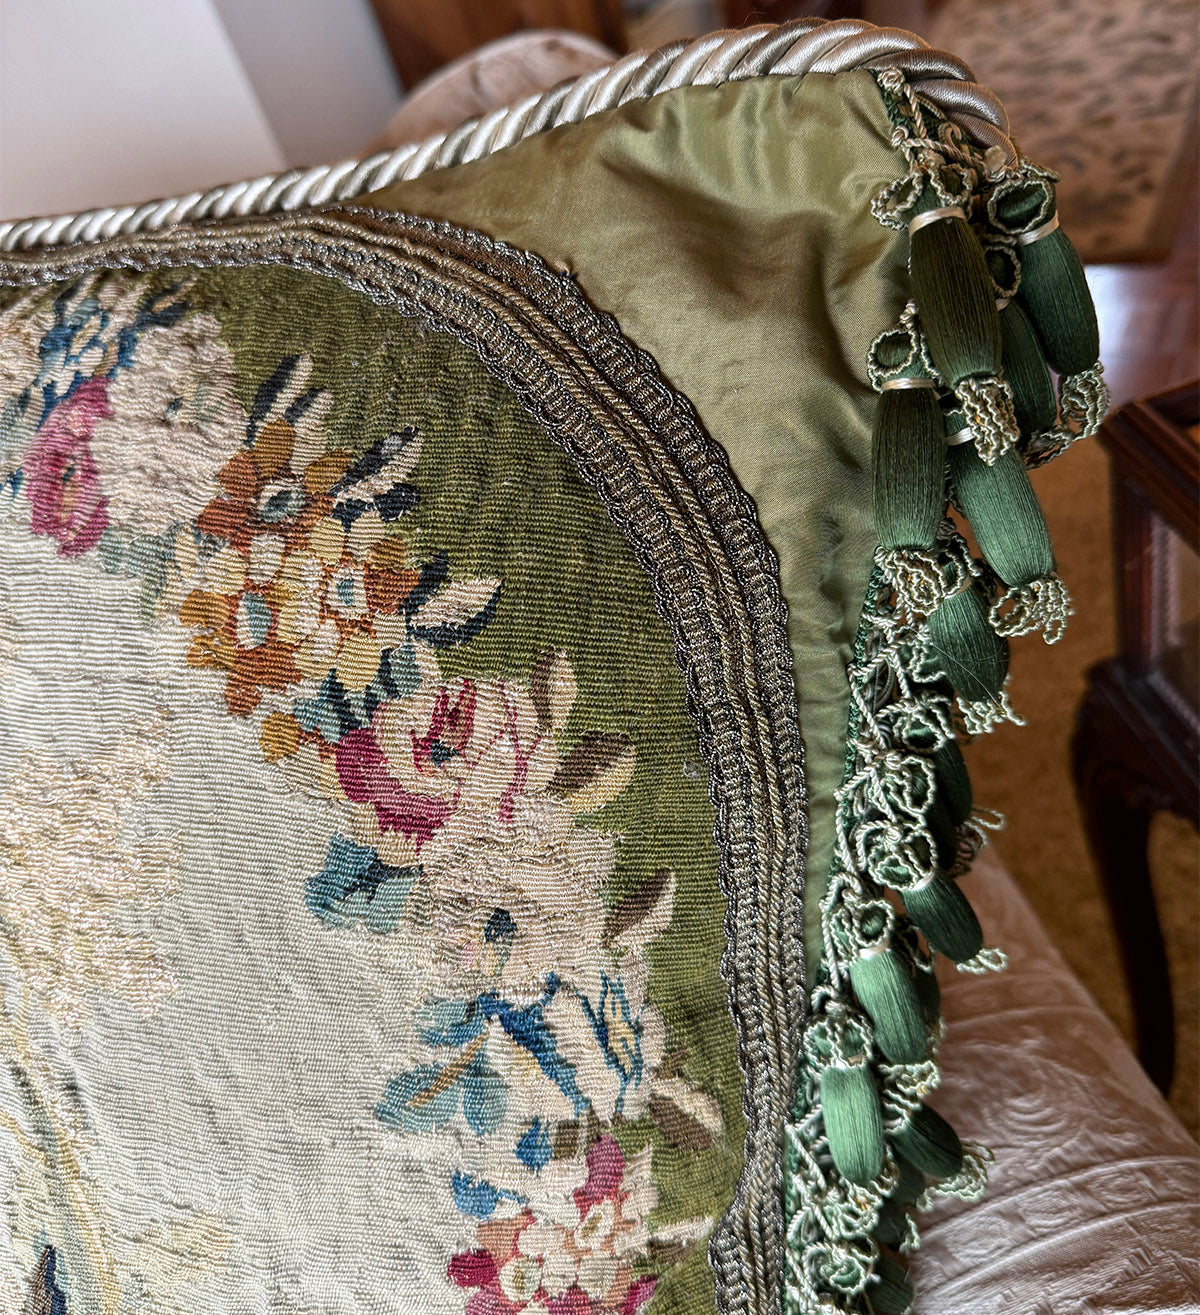 Opulent Large Antique 18th Century French Aubusson Tapestry Pillow #1, Birds, 25" x 25" + Fringe